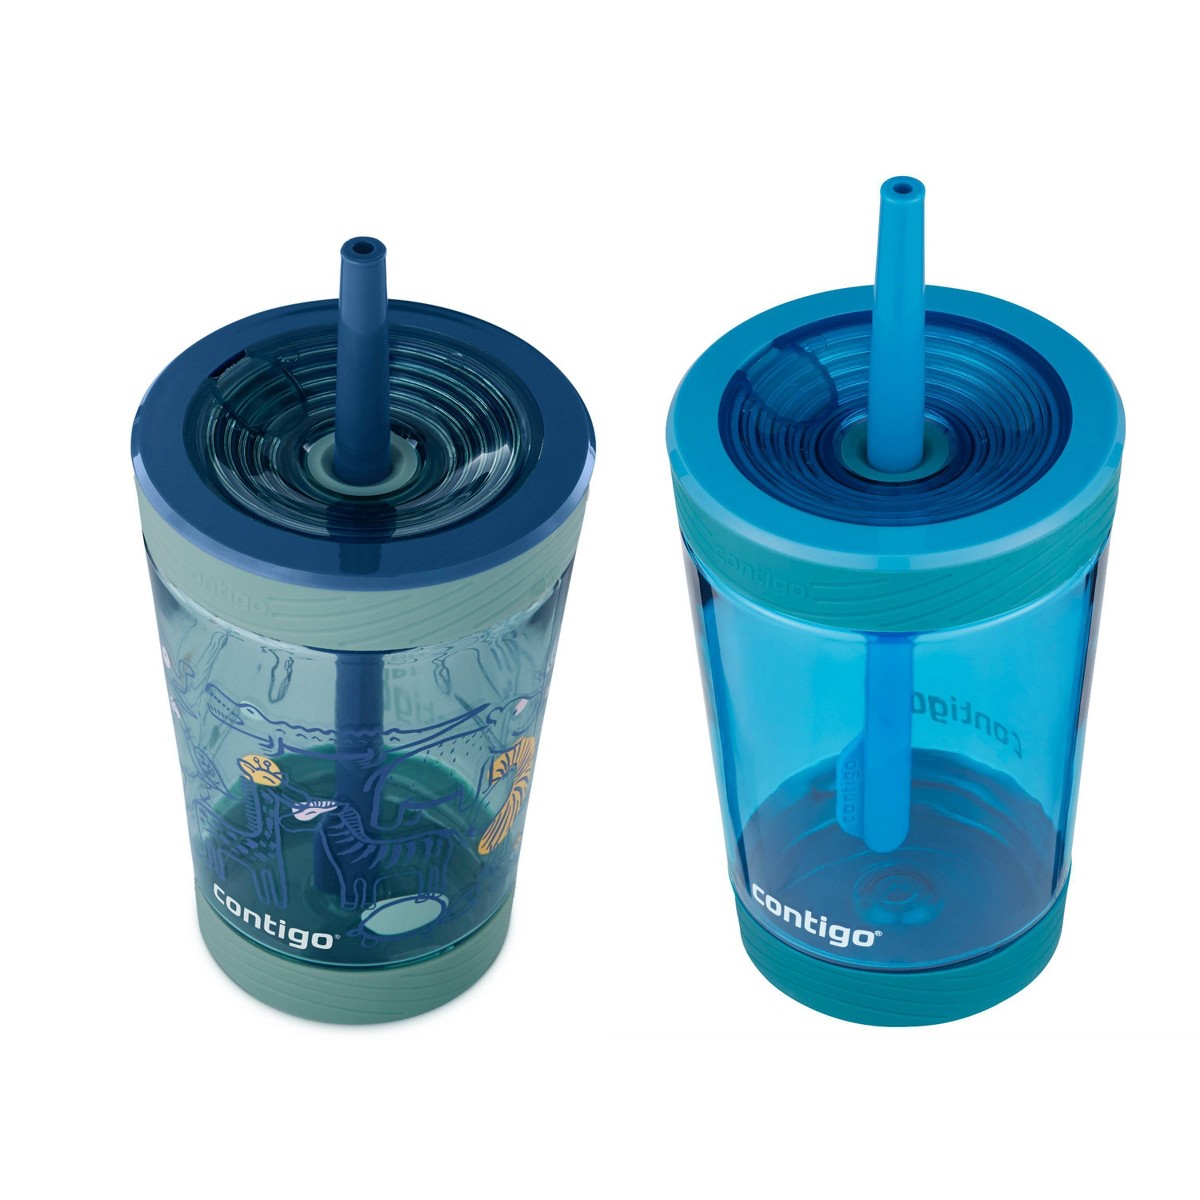 Contigo Kids Spill-Proof 14oz Tumbler with Straw and BPA-Free Plastic, Fits  Most Cup Holders and Dishwasher Safe, Gummy